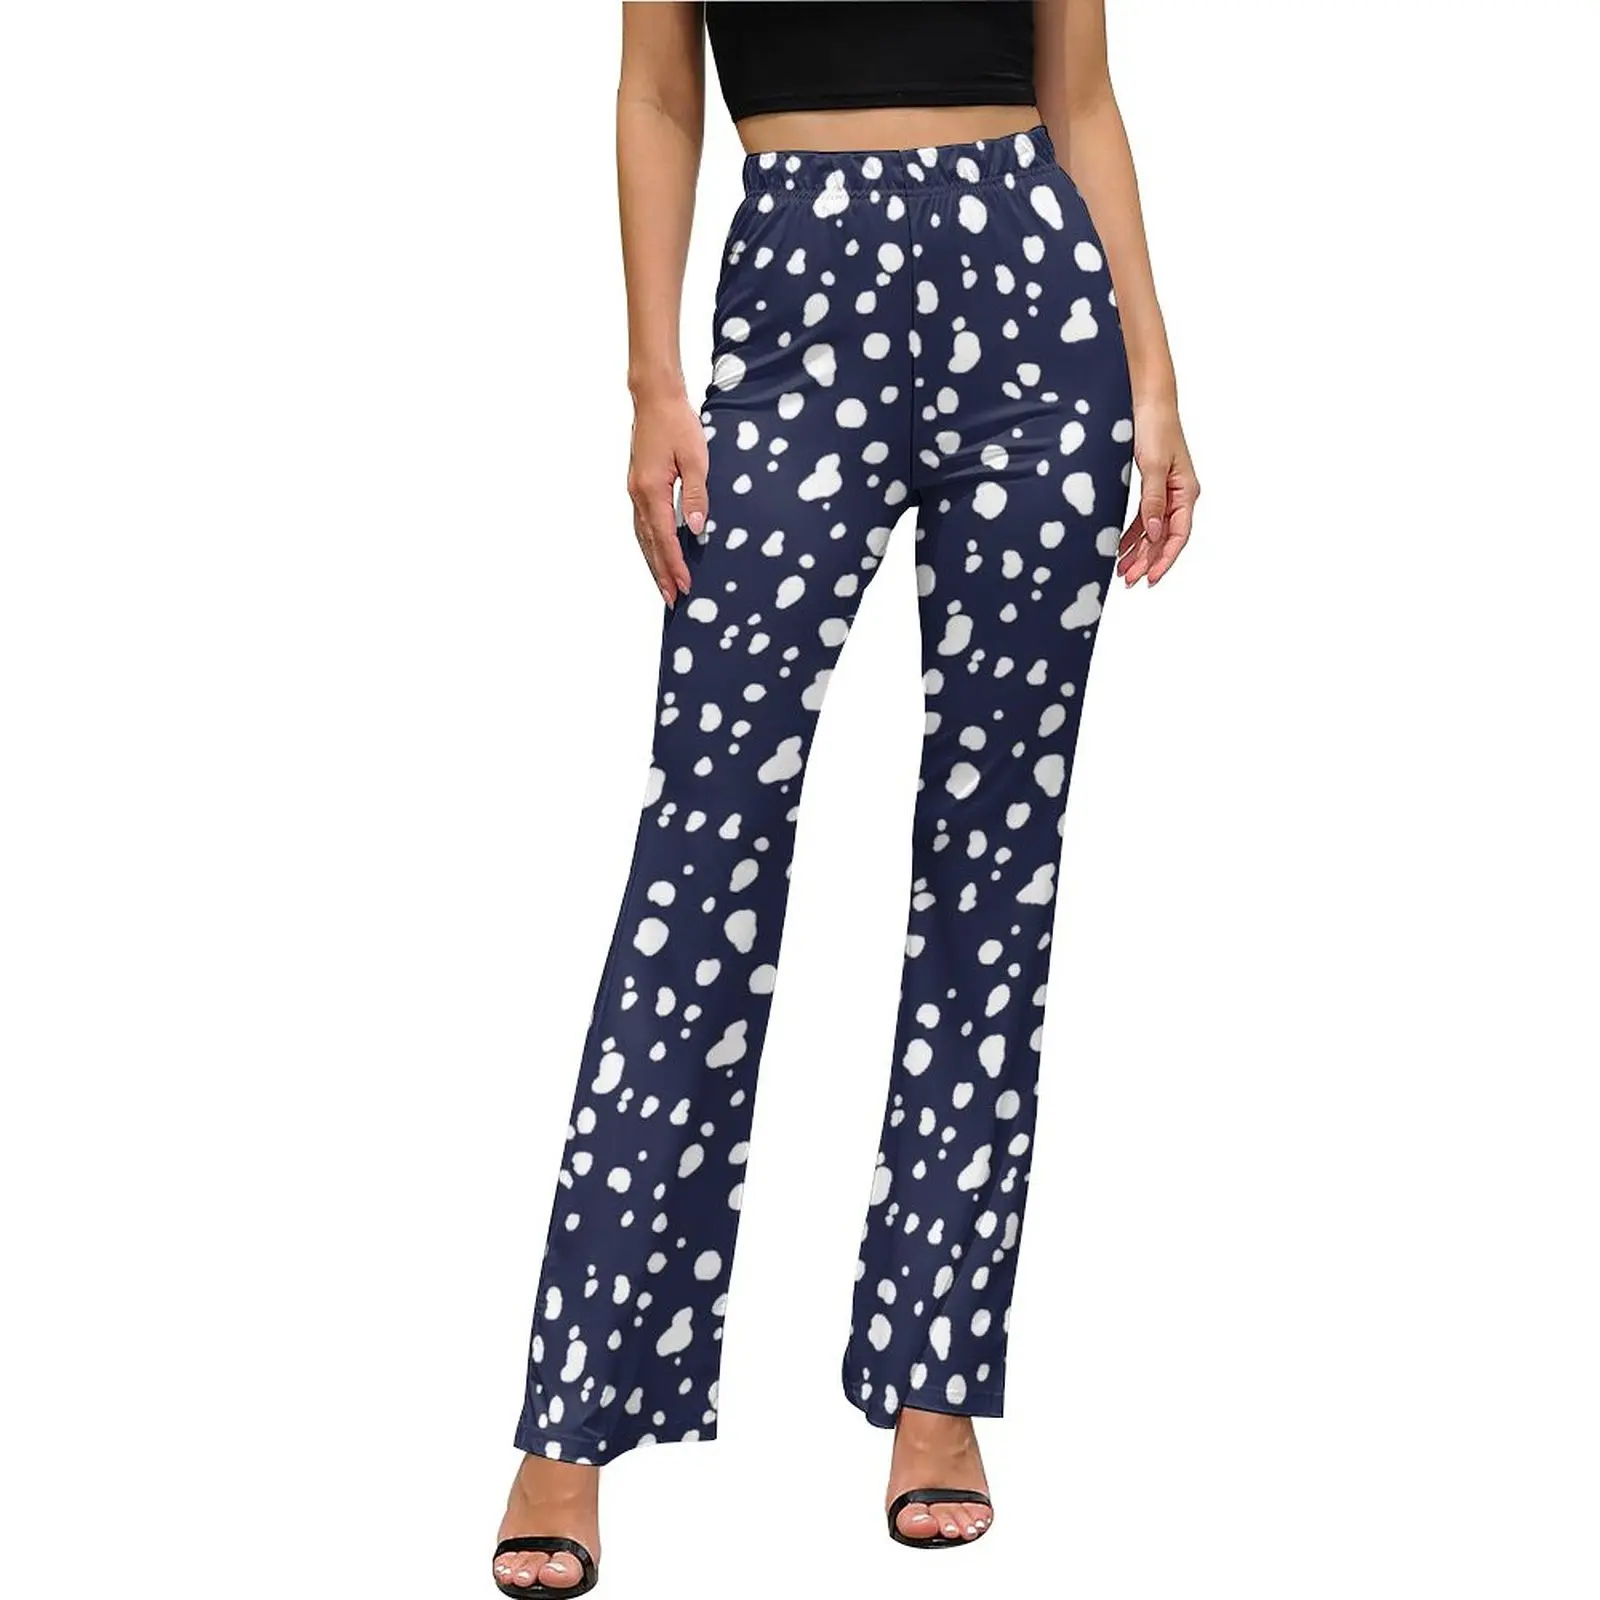 

Dalmatian Print Casual Pants Autumn Navy Blue and White Office Design Flare Trousers High Waist Slim Stretch Fashion Pants